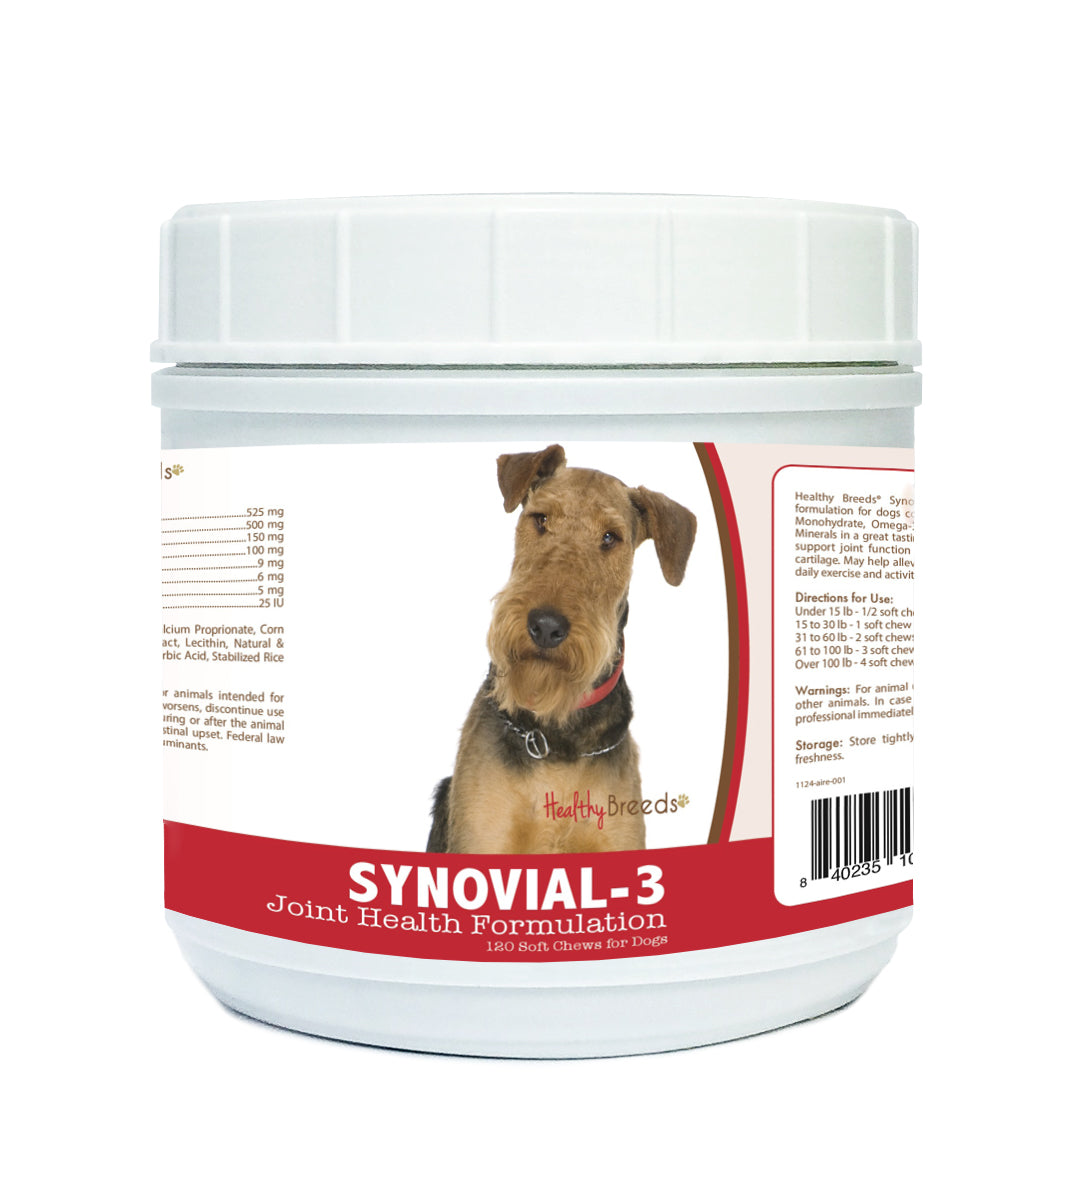 Airedale Terrier Synovial-3 Joint Health Formulation Soft Chews 120 Count